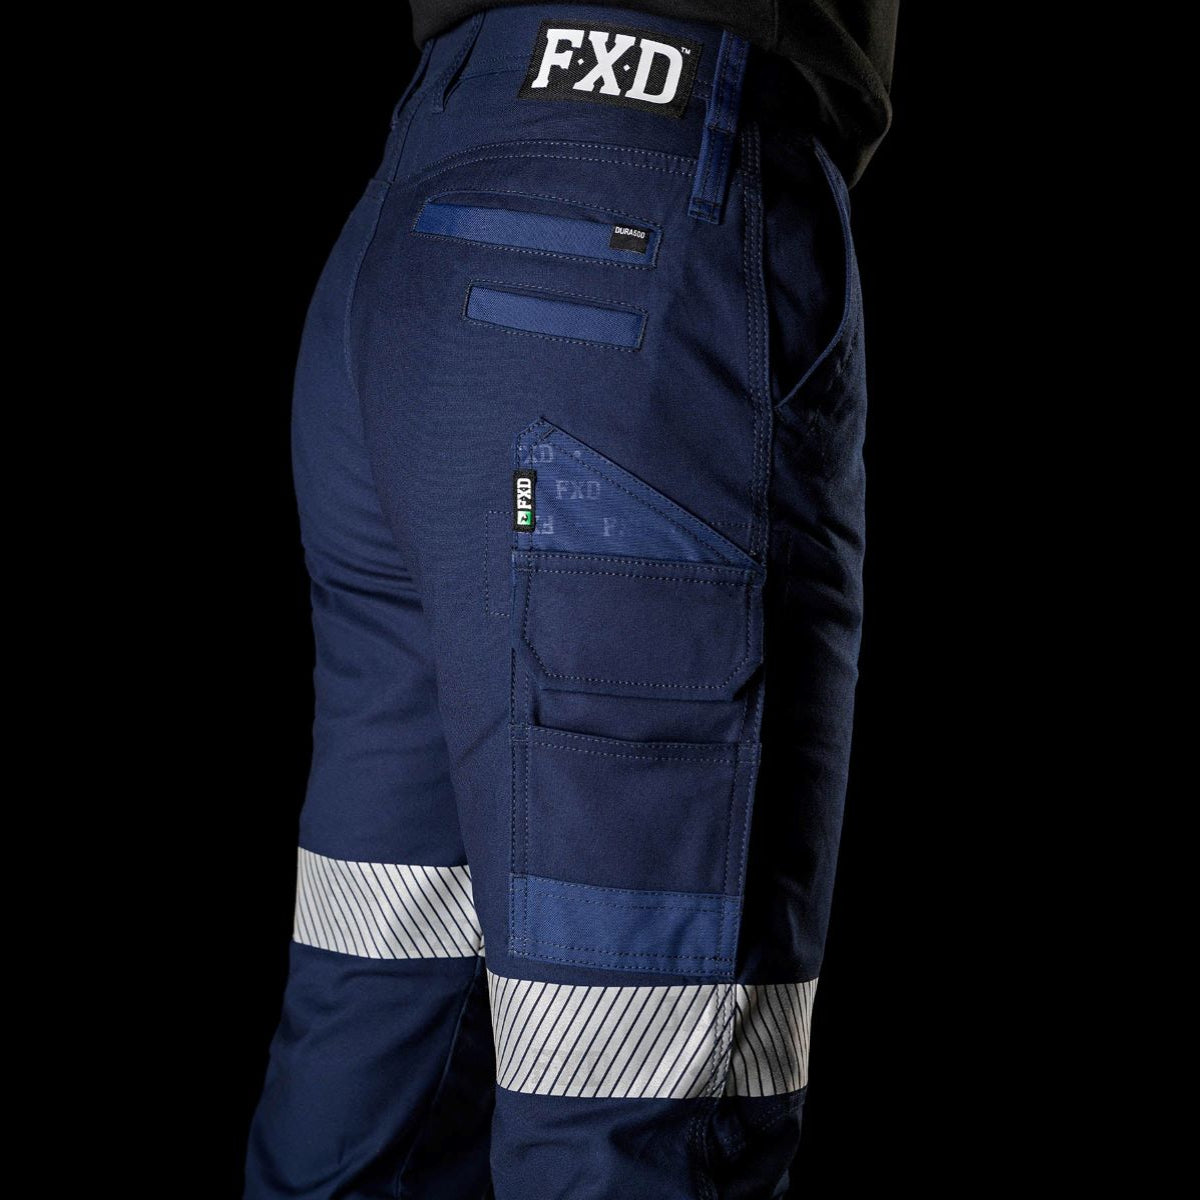 FXD WP-4WT Womens Taped Stretch Cuffed Work Pants